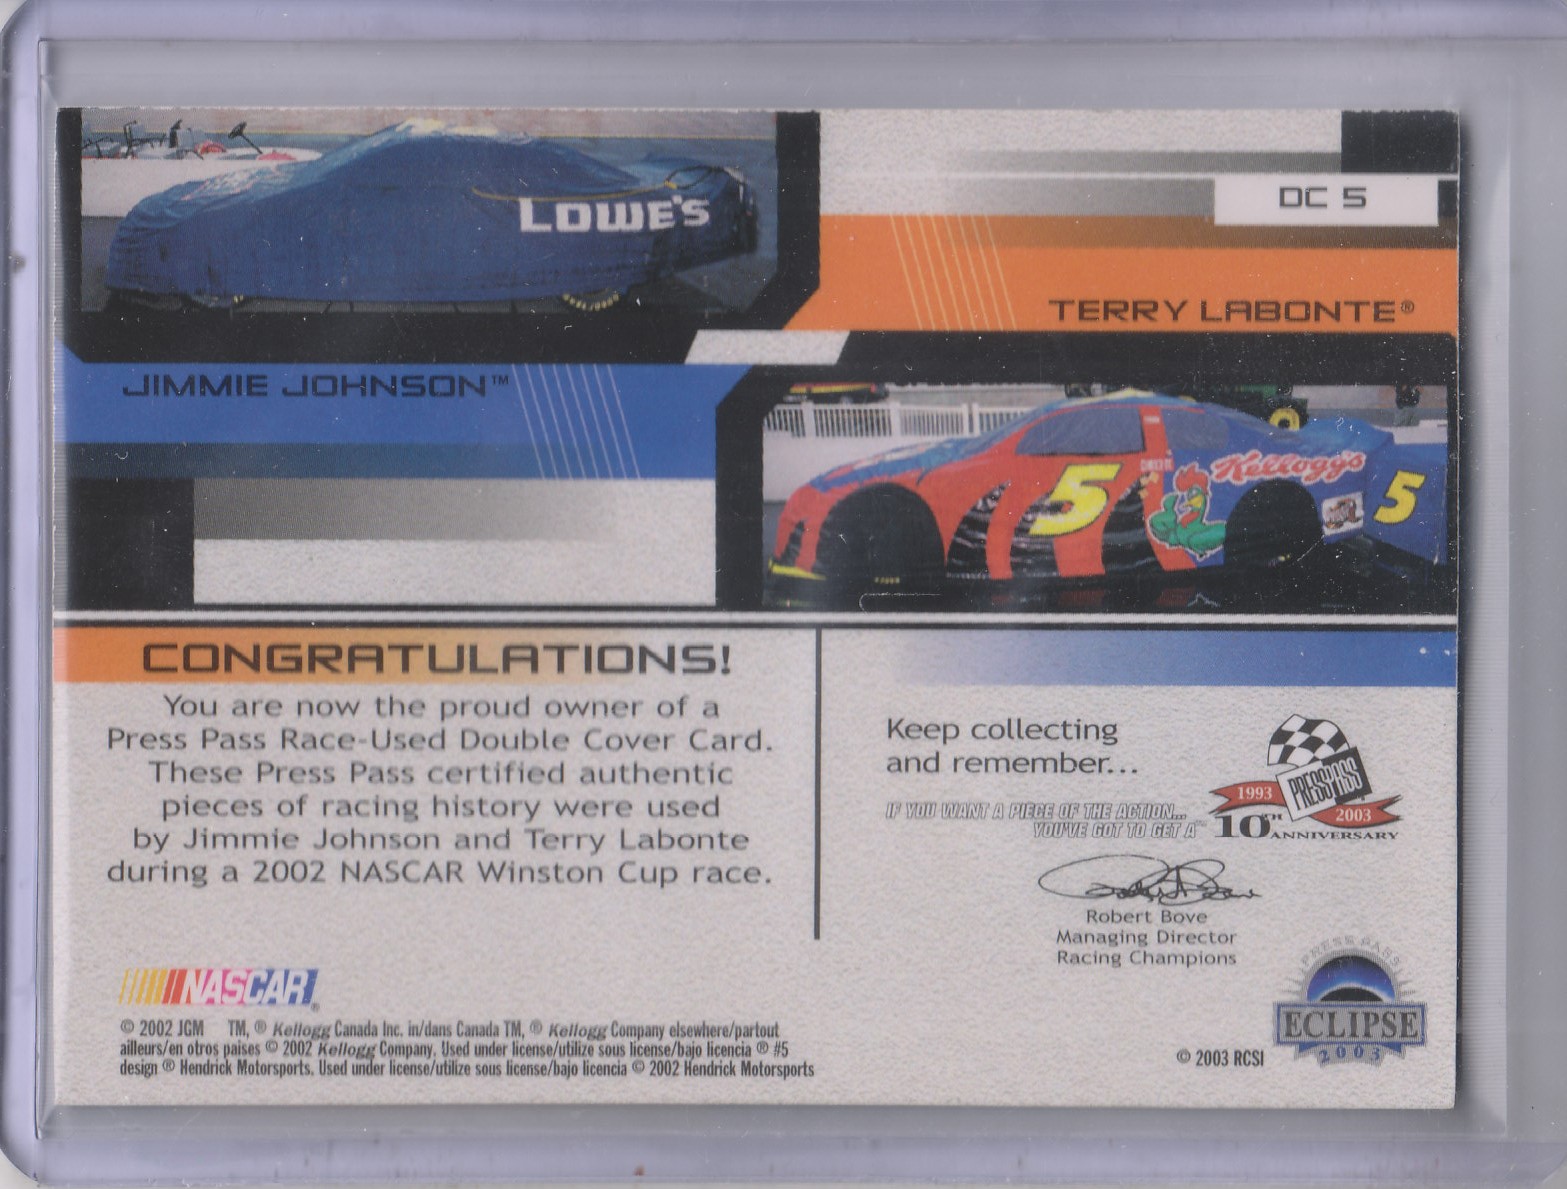 2003 Press Pass Eclipse Under Cover Double Cover #DC5 Terry Labonte/Jimmie Johnson back image